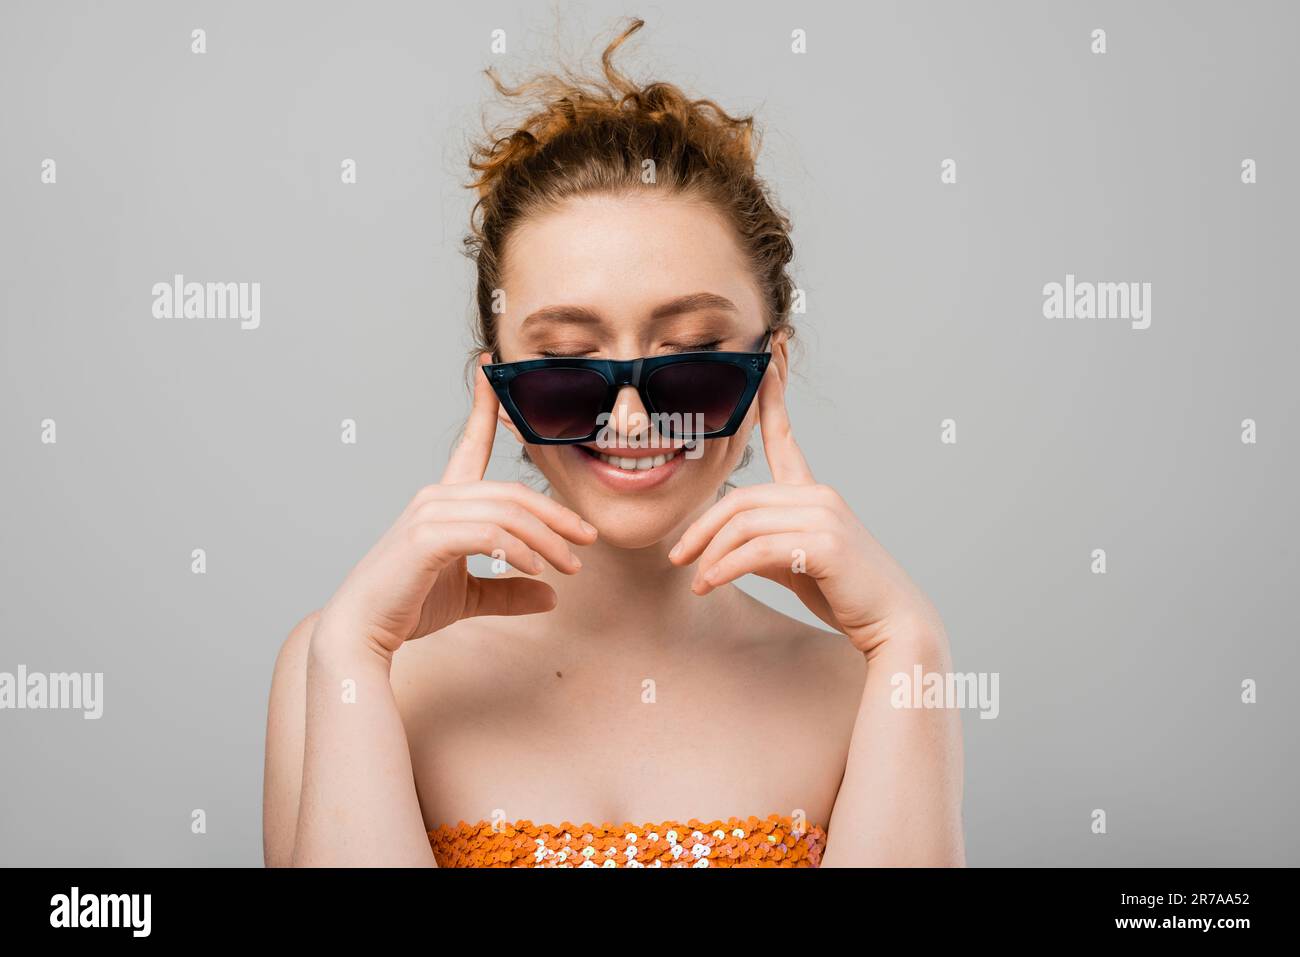 Cheerful young red haired woman with natural makeup in sunglasses and orange top with sequins closing eyes while standing isolated on grey background, Stock Photo